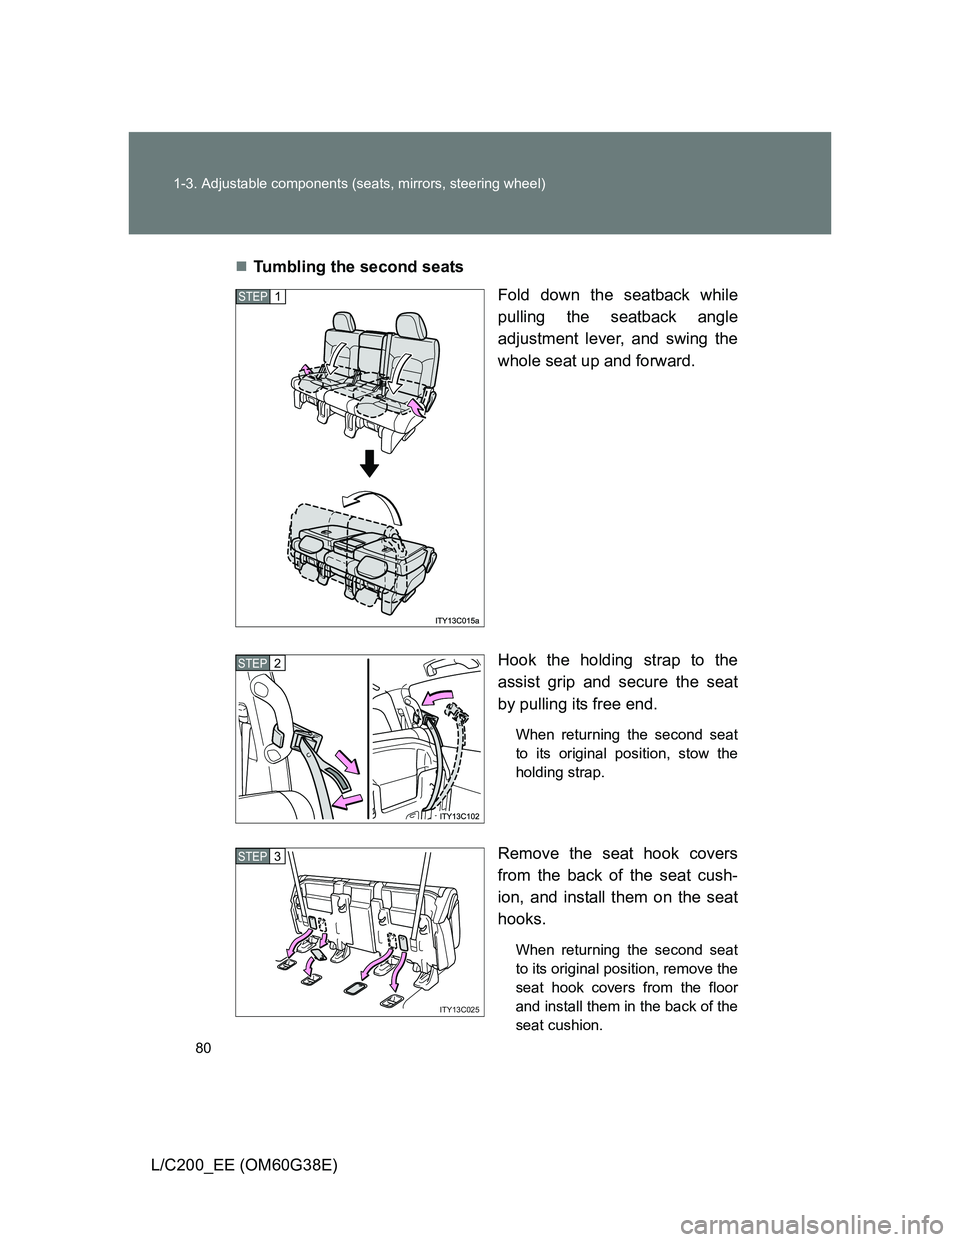 TOYOTA LAND CRUISER 2012  Owners Manual 80 1-3. Adjustable components (seats, mirrors, steering wheel)
L/C200_EE (OM60G38E)Tumbling the second seats
Fold down the seatback while
pulling the seatback angle
adjustment lever, and swing the
